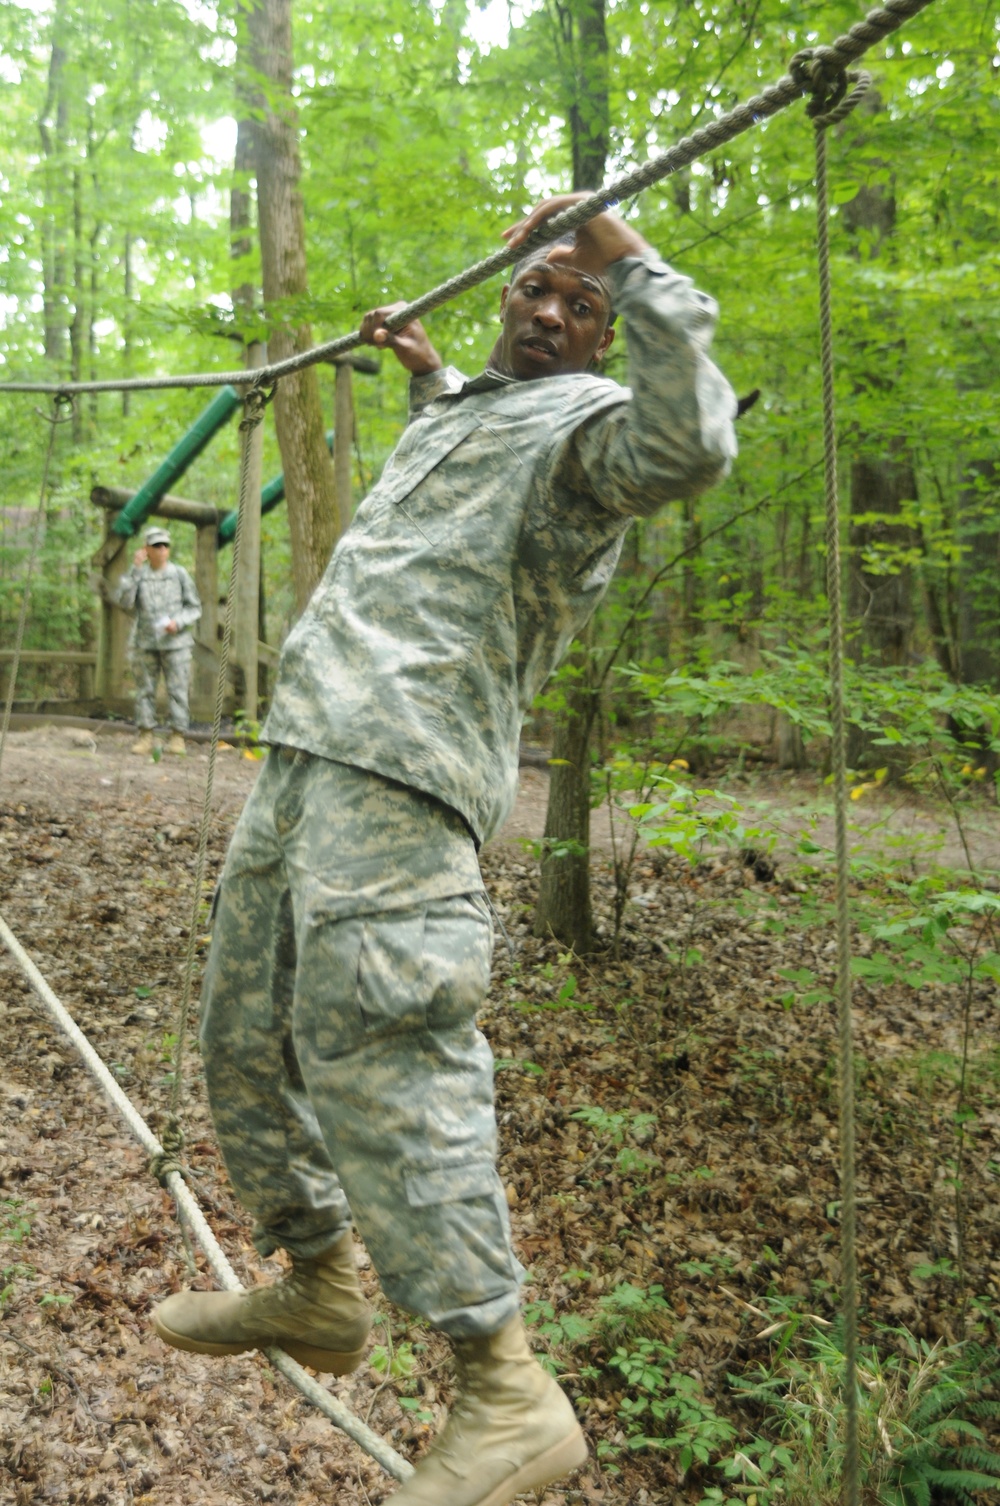 Soldiers compete in Warfighter Competition